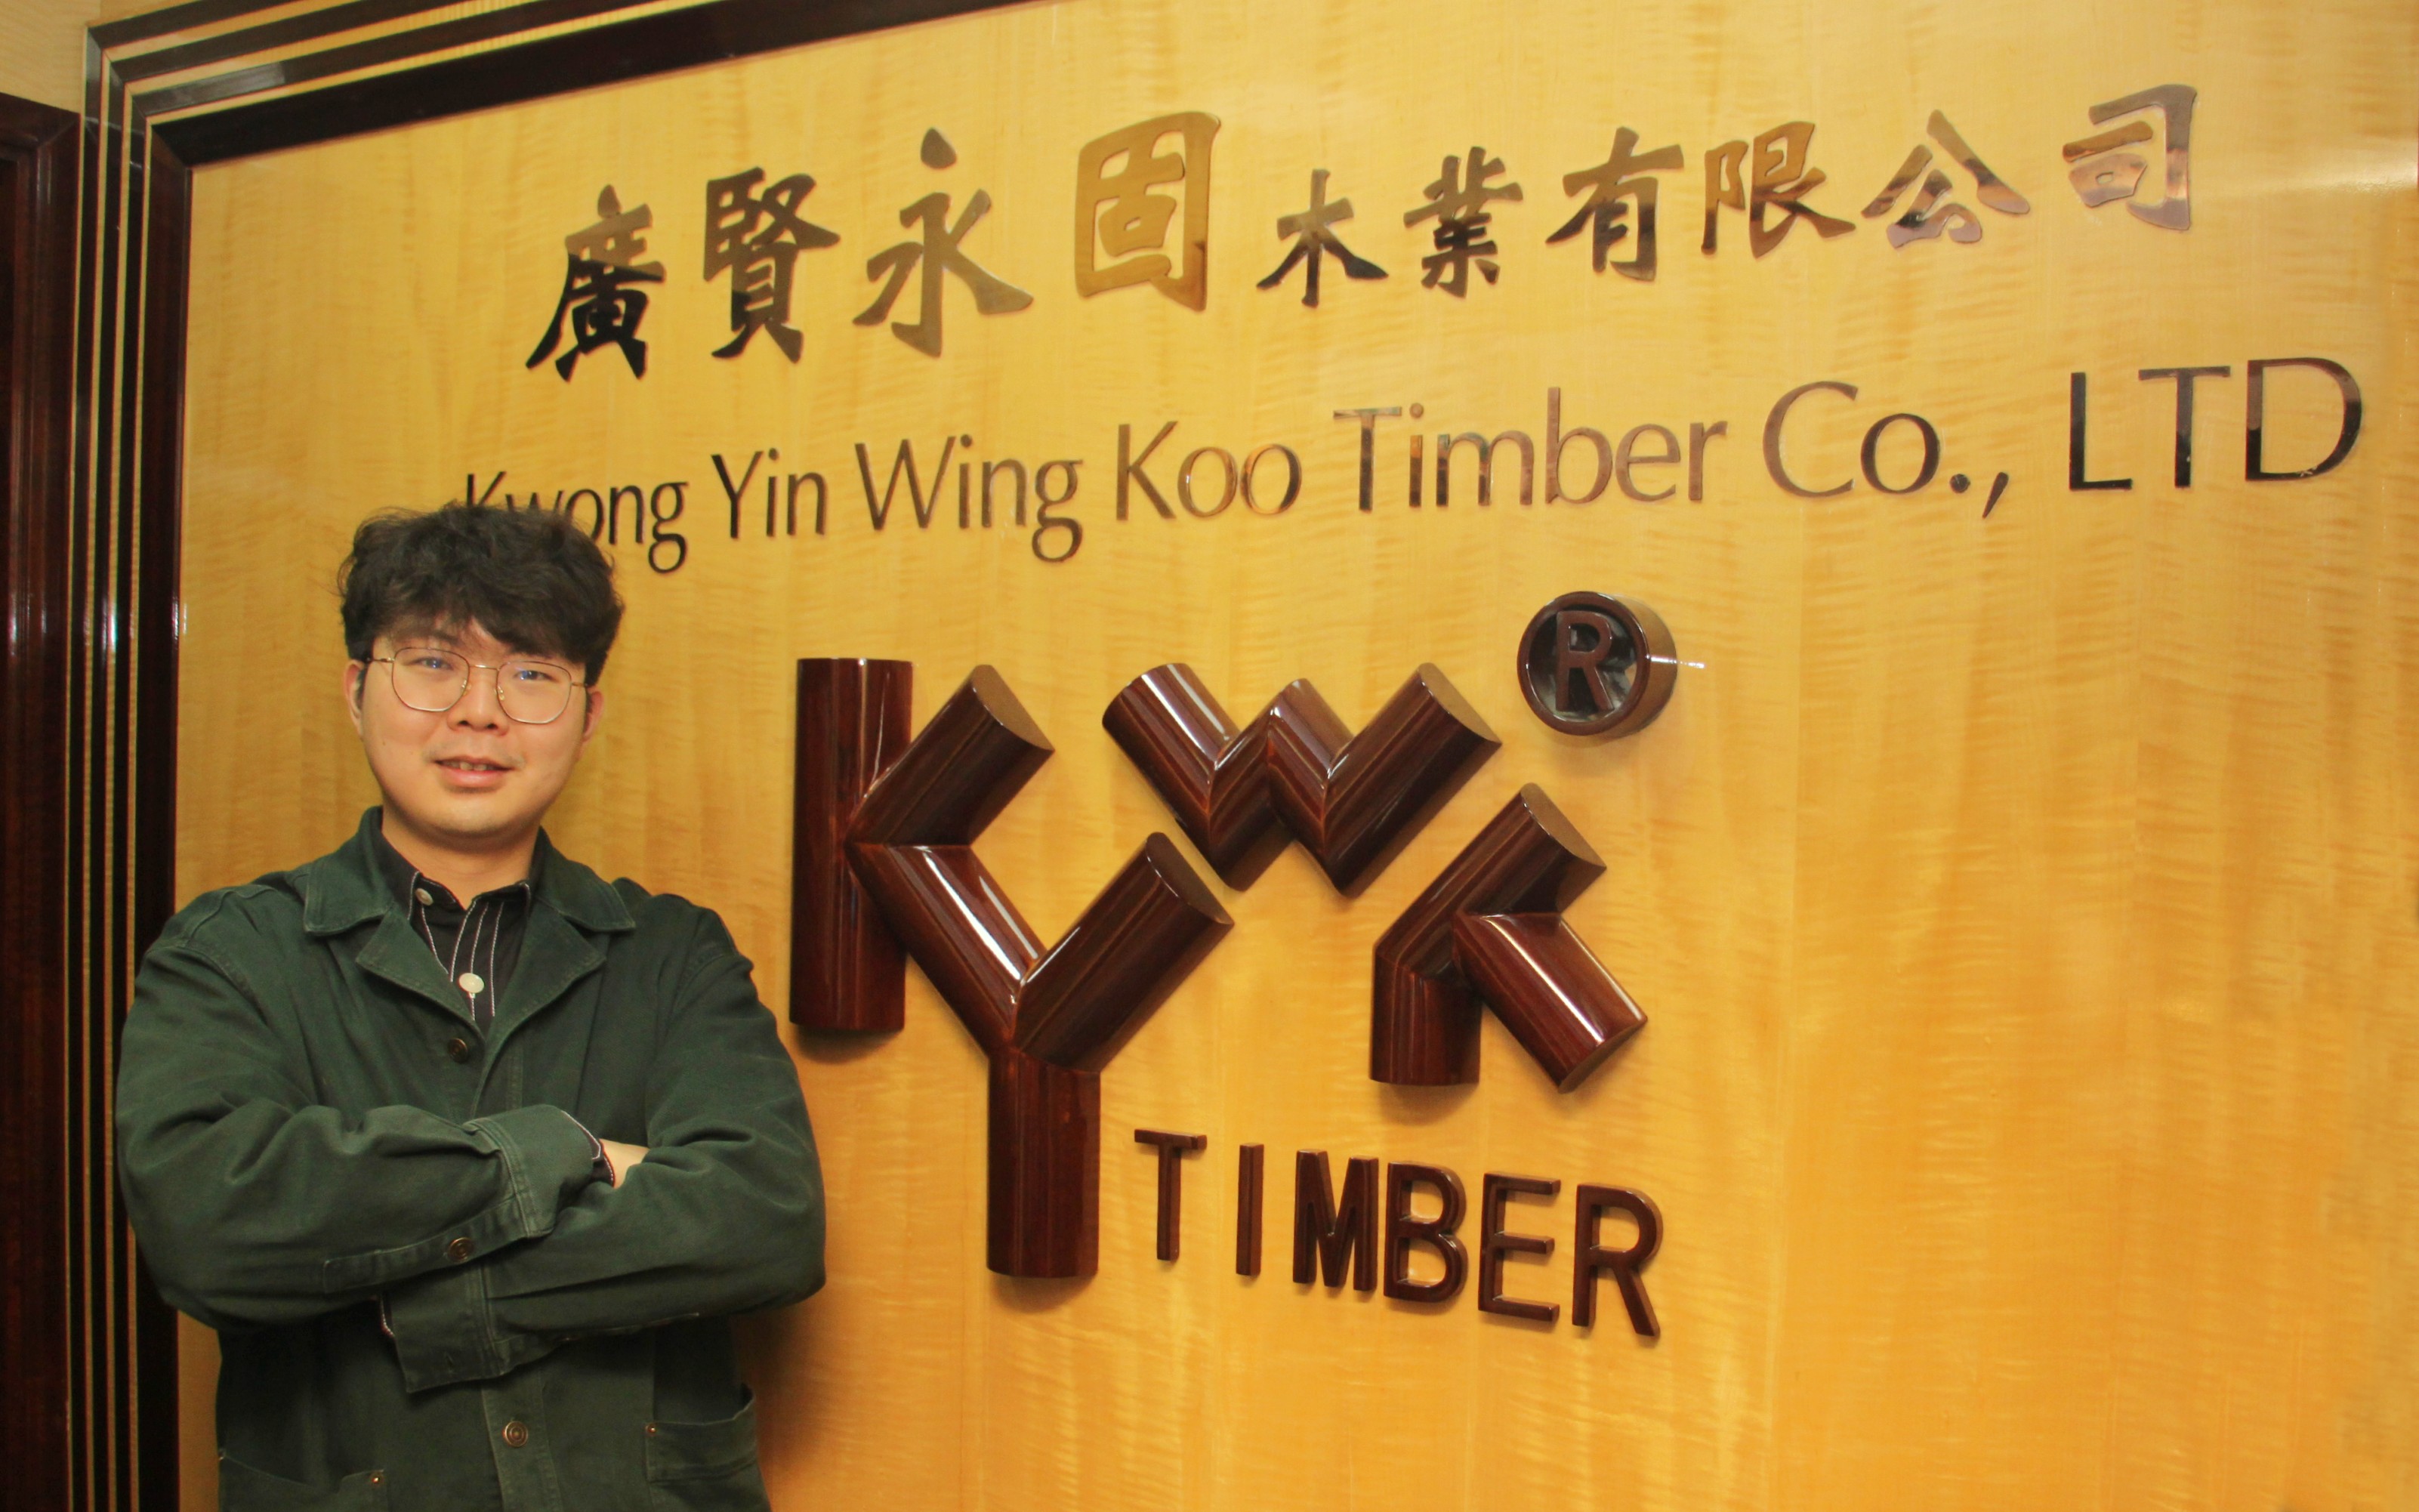 After taking over the family business of Kwong Yin Wing Koo last year, Thomas Chan launched a digital transformation initiative to boost the company’s competitiveness. 